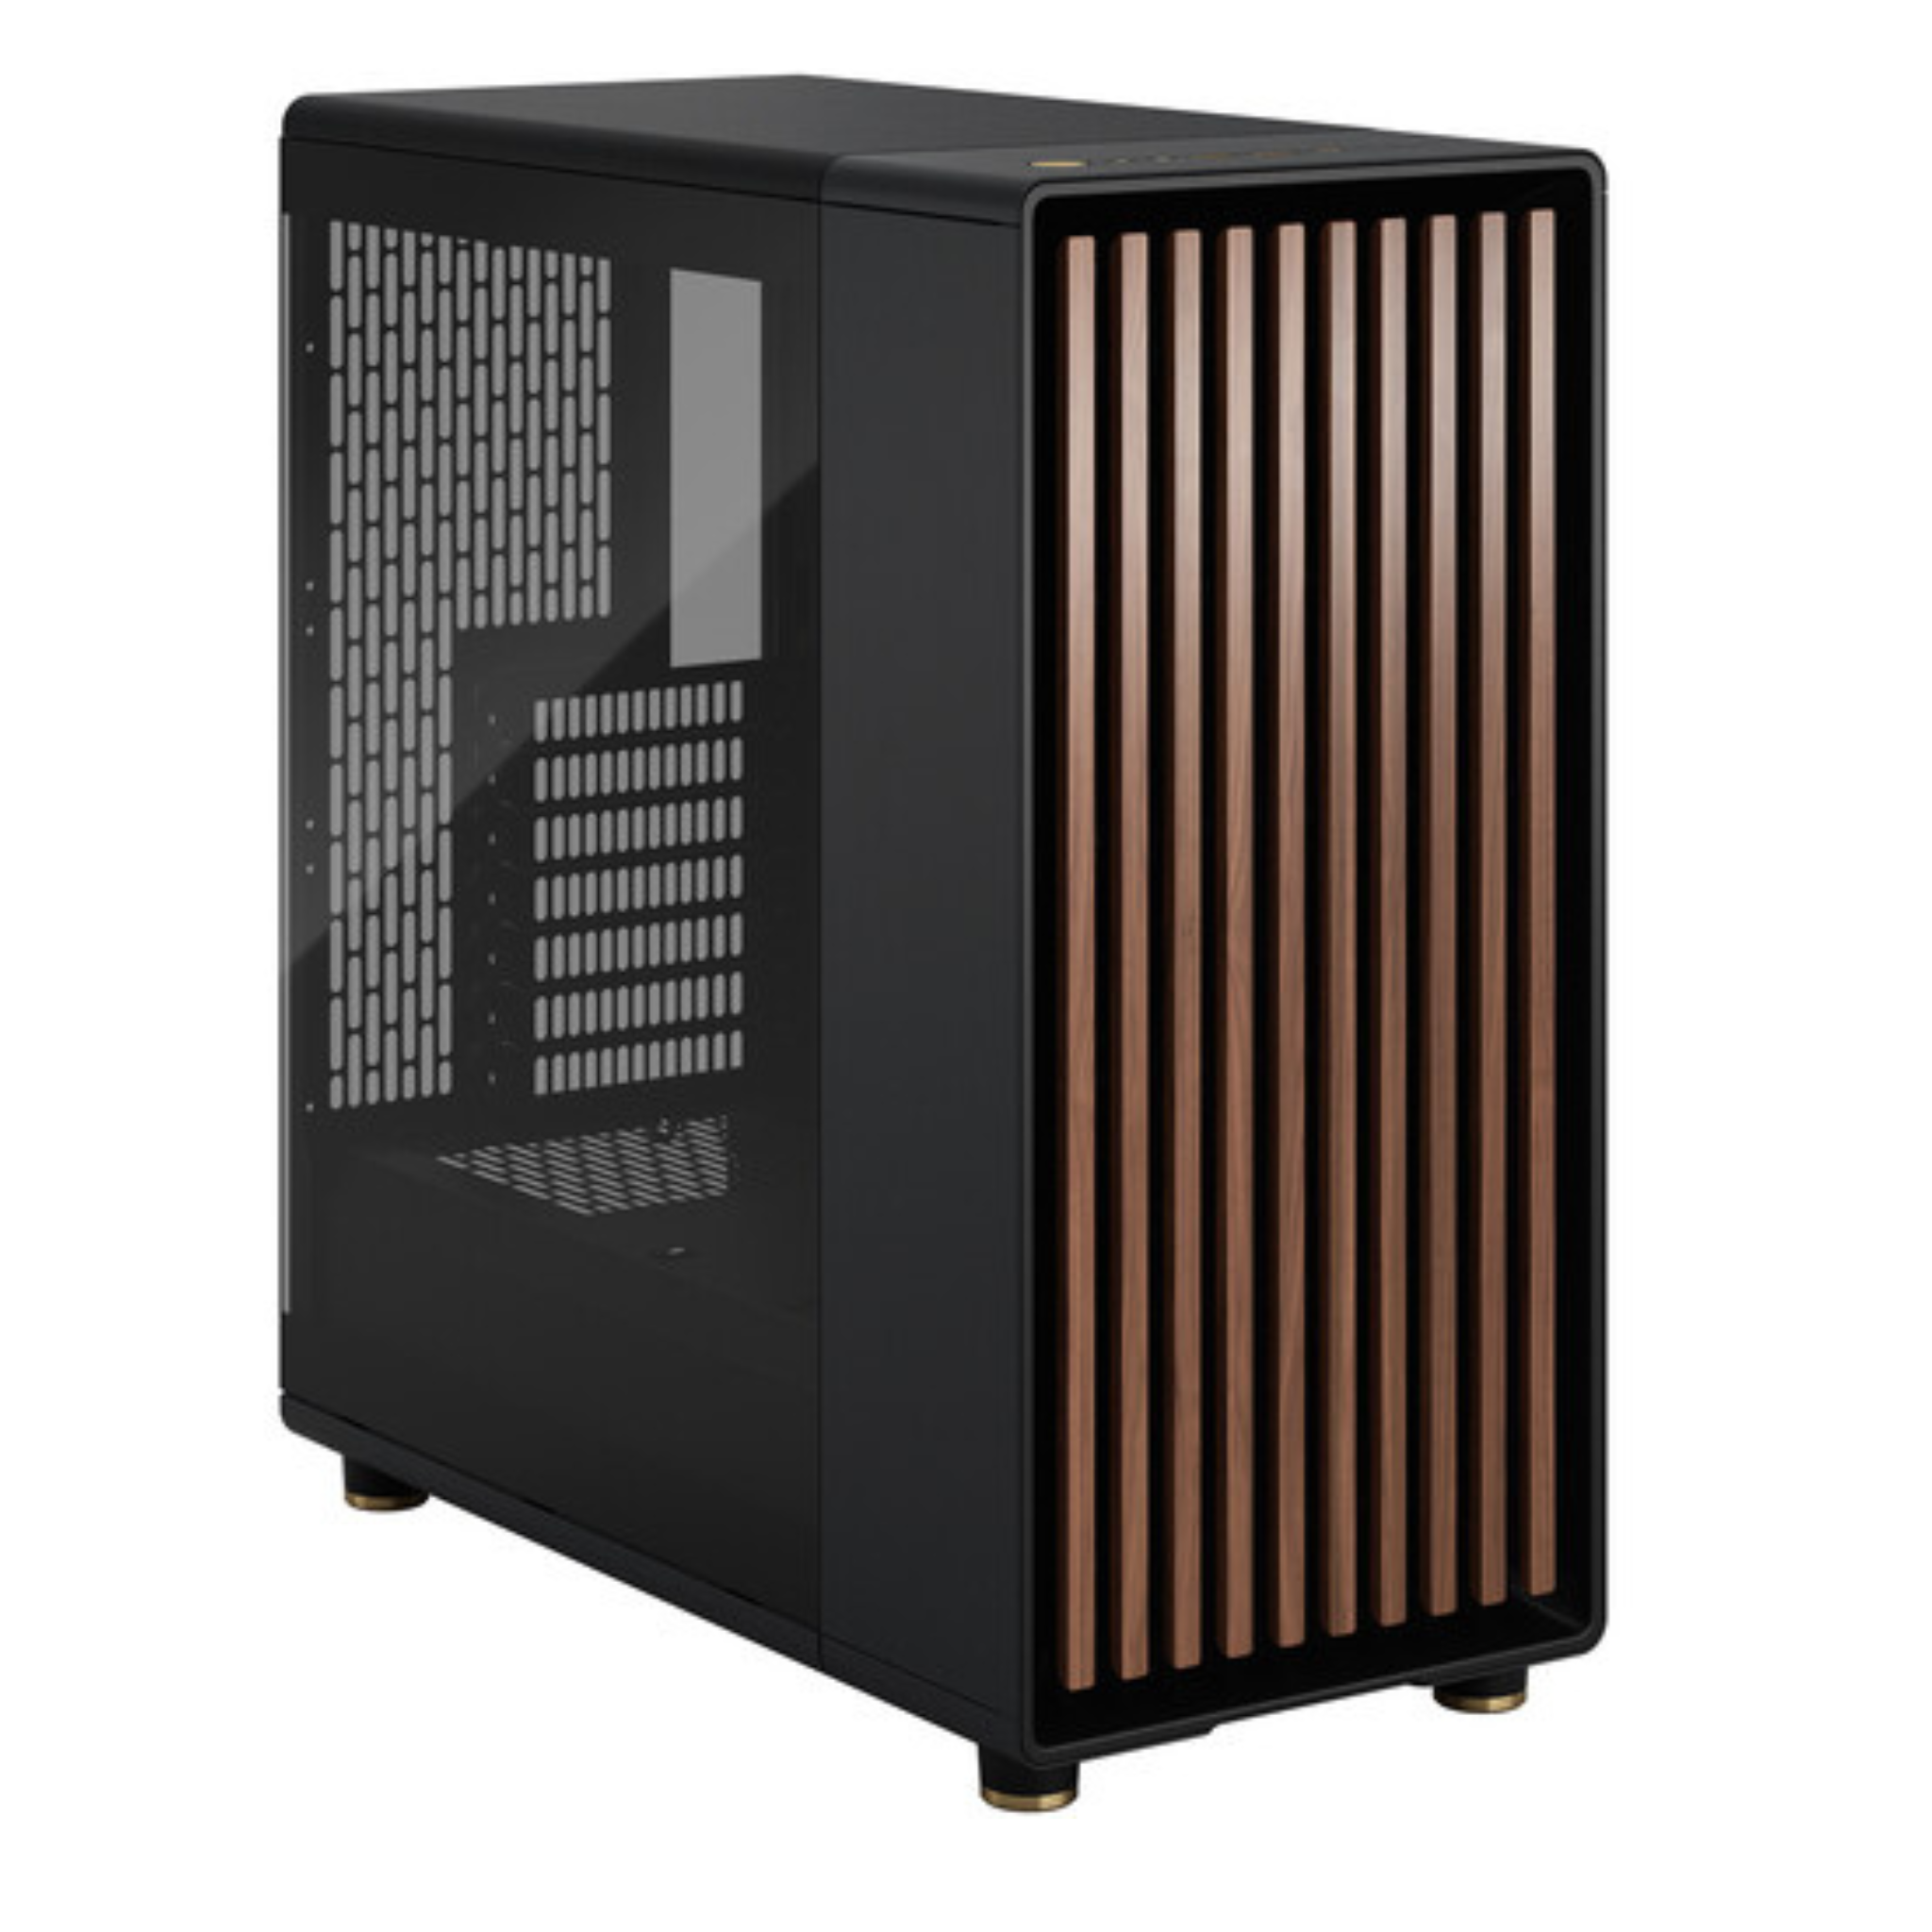 Fractal Design North Mid Tower ATX Computer Case (Charcoal or White)